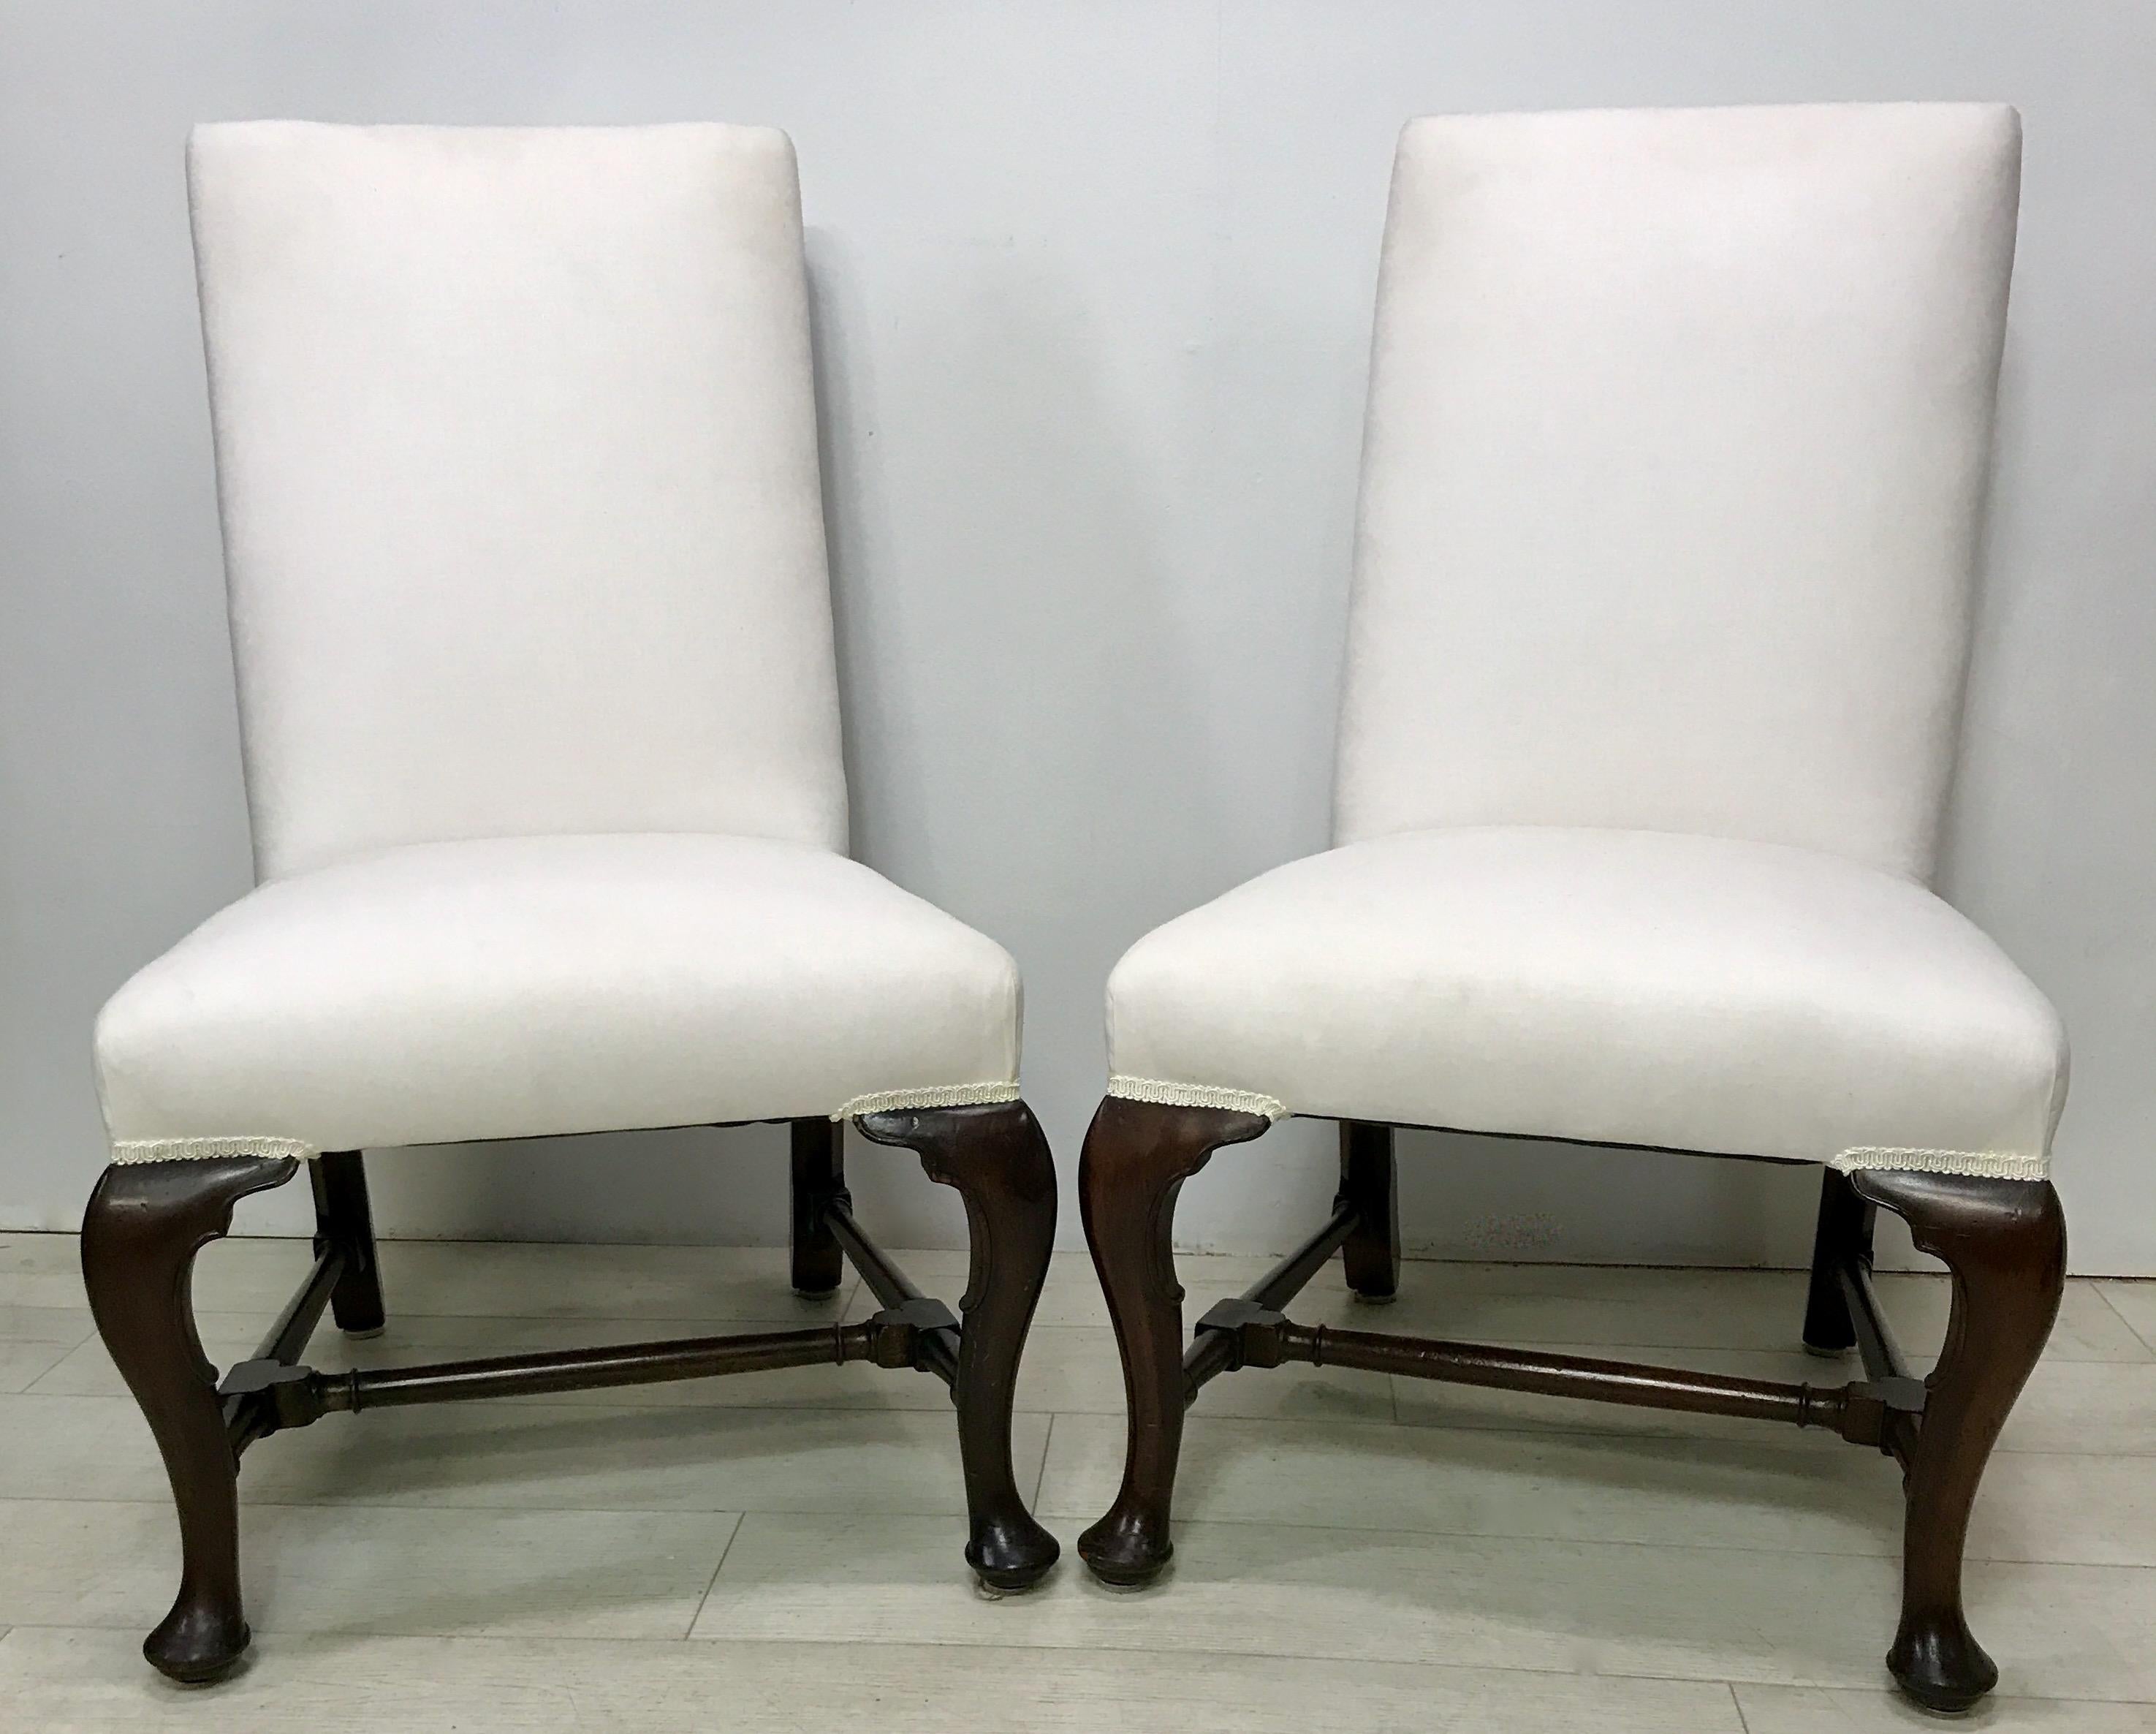 A pair of beautifully hand crafted (bench-made) Queen Anne style mahogany side chairs, ready for upholstery.
These chairs are in excellent condition, sturdy and sound.
Made in the early 20th Century